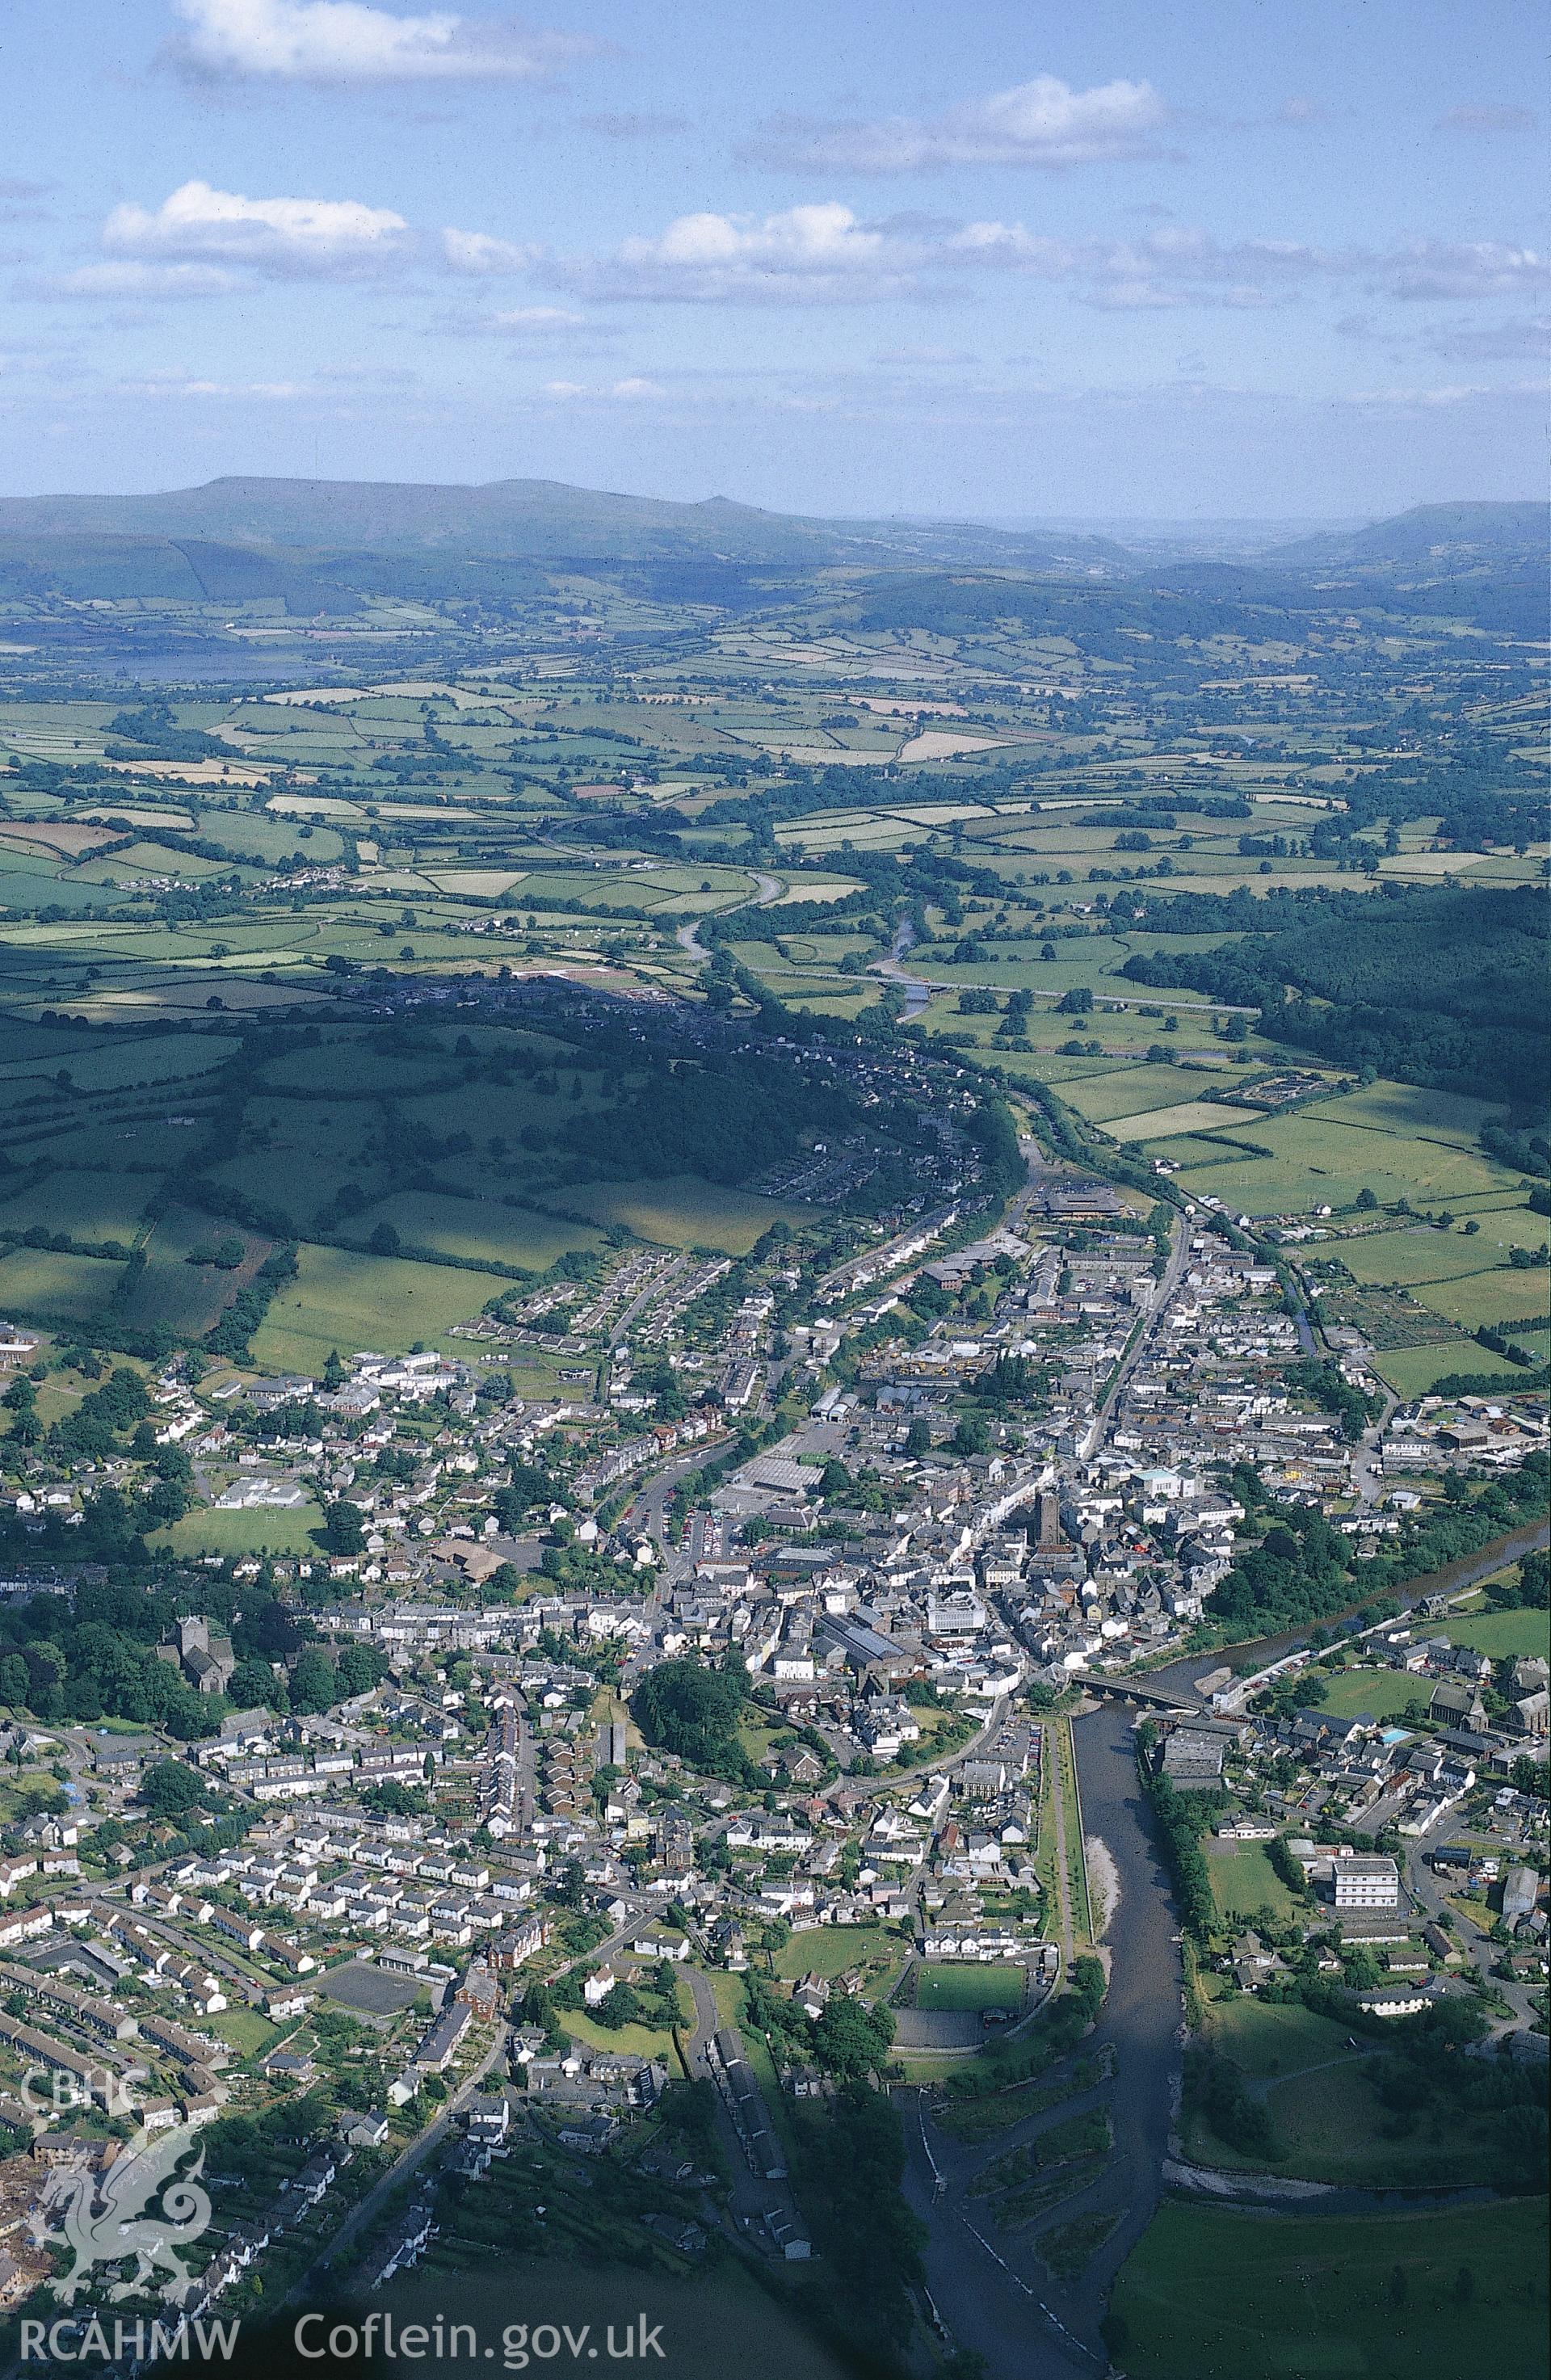 Slide of RCAHMW colour oblique aerial photograph of aerial view of Brecon Town, taken by C.R. Musson, 1989.